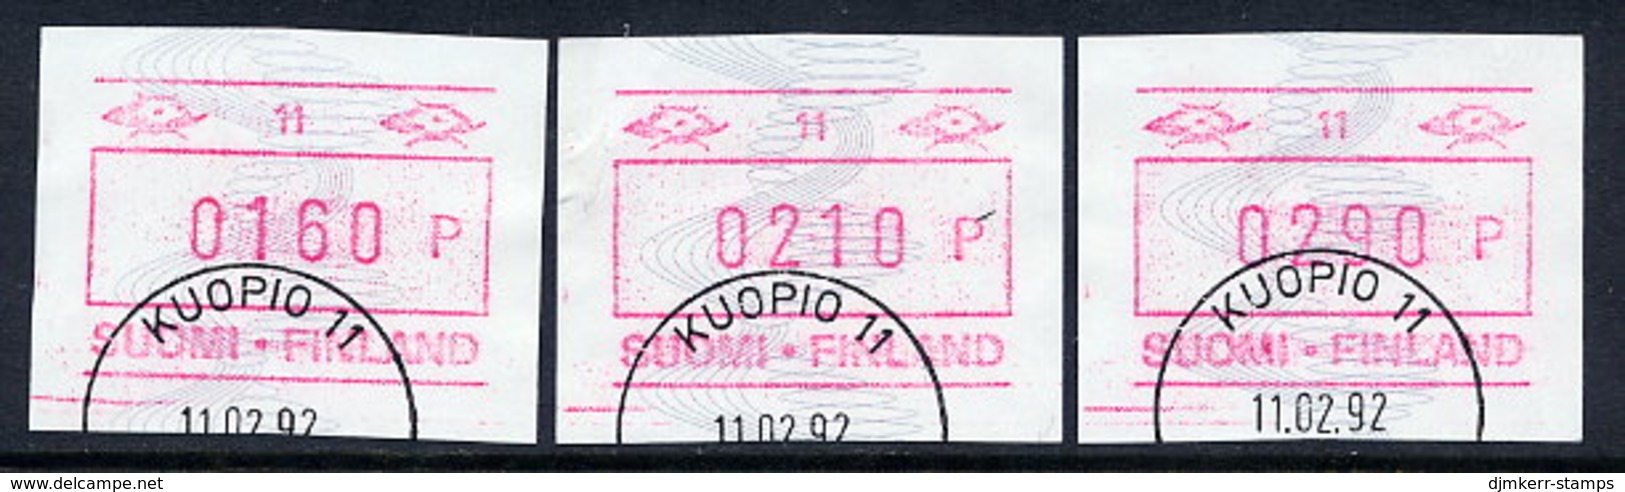 FINLAND 1990 Definitive With ATM Number , 3 Different Values Used .Michel 8 - Machine Labels [ATM]